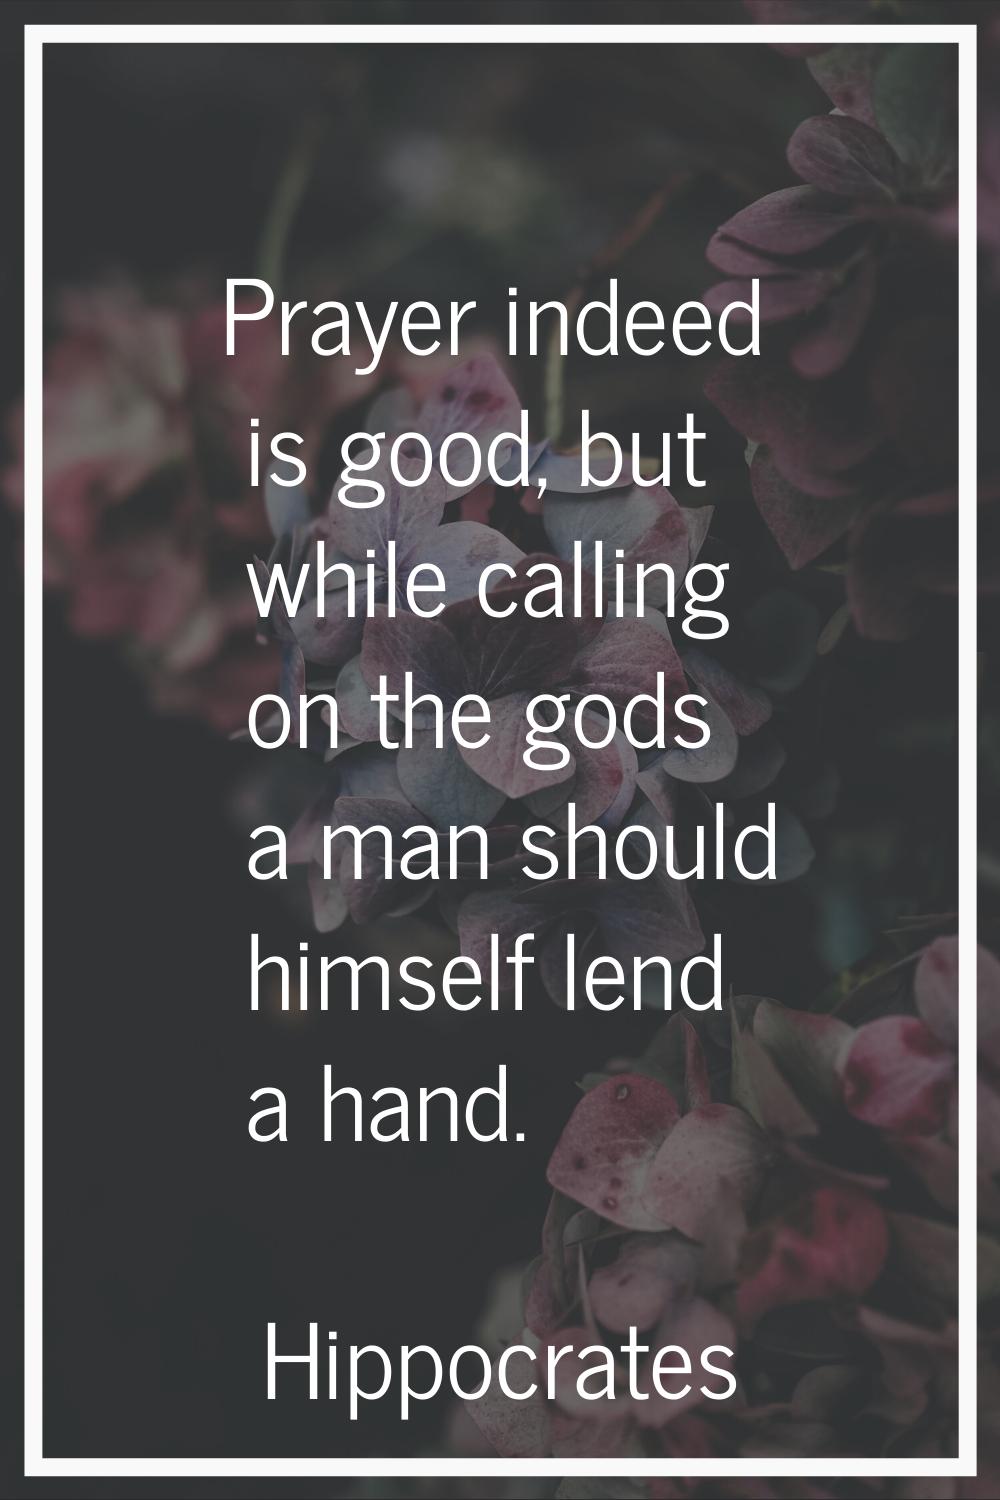 Prayer indeed is good, but while calling on the gods a man should himself lend a hand.